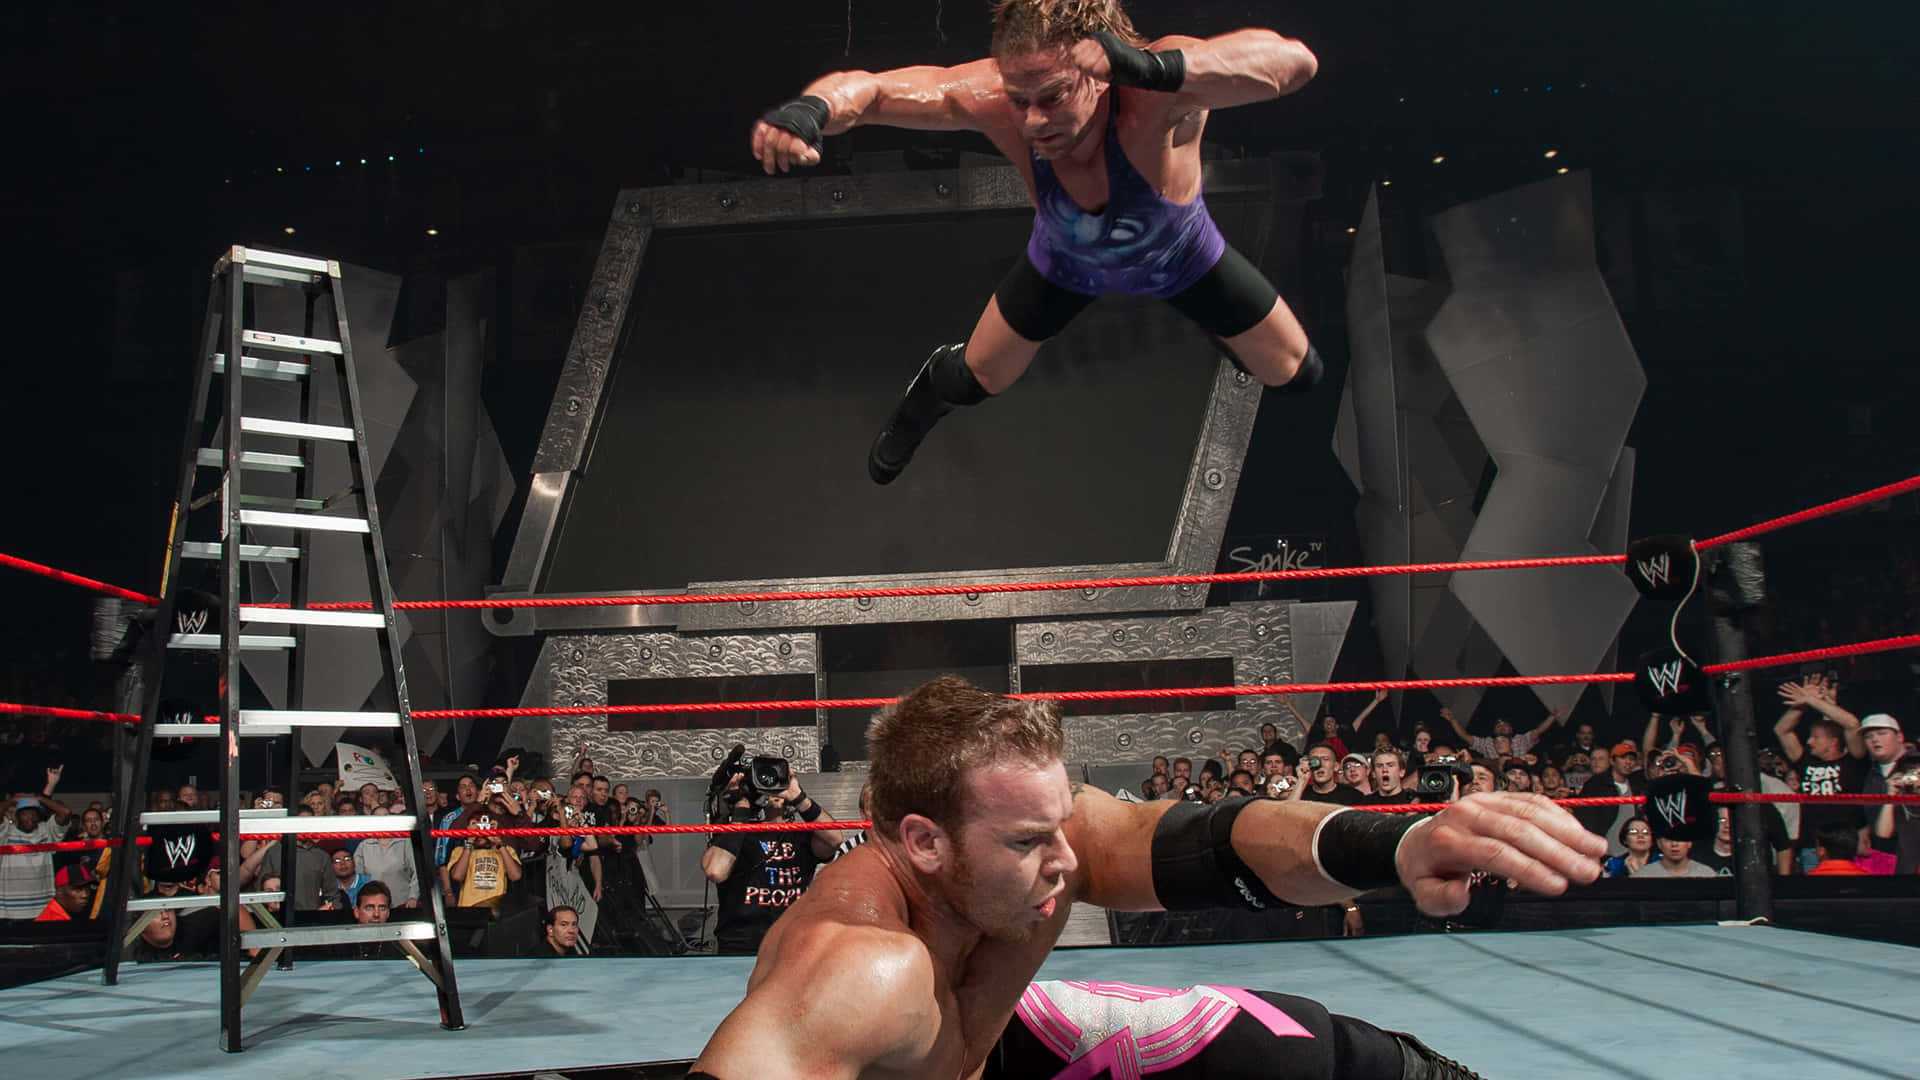 Pro Wrestlers Rob Van Dam and Christian Cage in Action Wallpaper